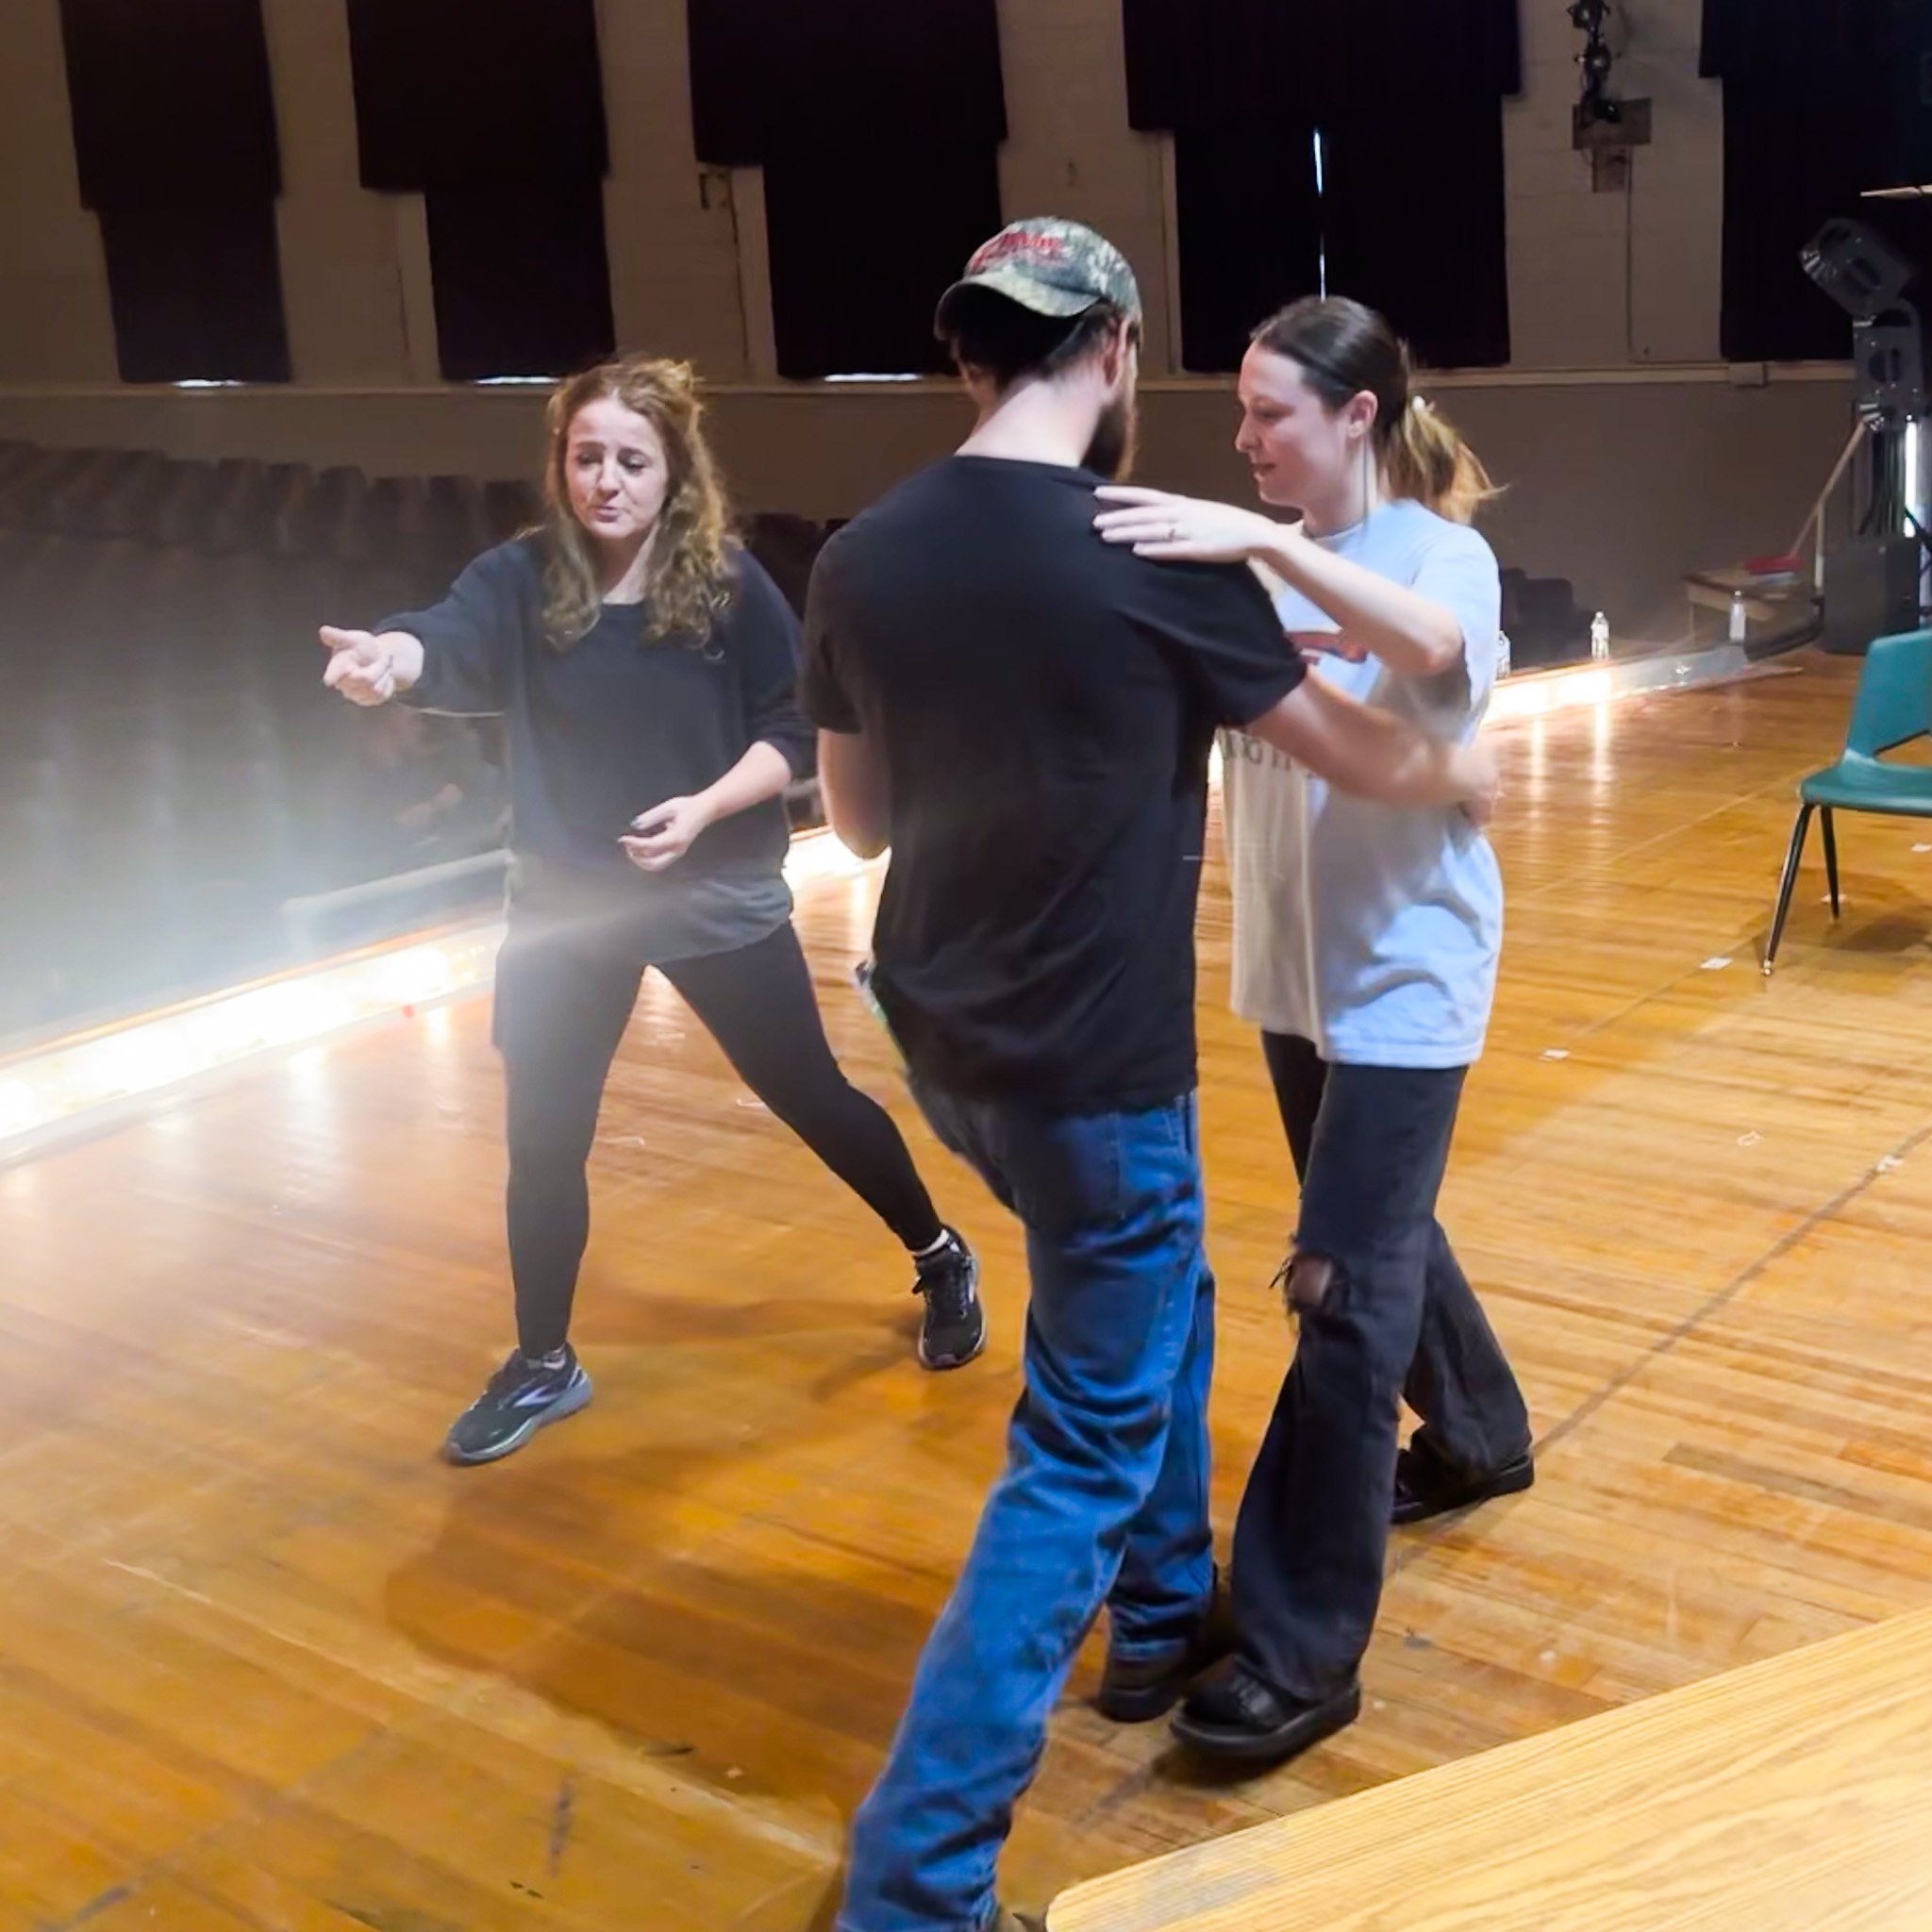 We are about 2 1/2 weeks away from opening night!

Rehearsals and set construction for &quot;The Last Night of Ballyhoo&quot; are underway! Local dance instructor Marcy Wuestenhoefer is teaching the cast members some dance moves. We had a nice turnou